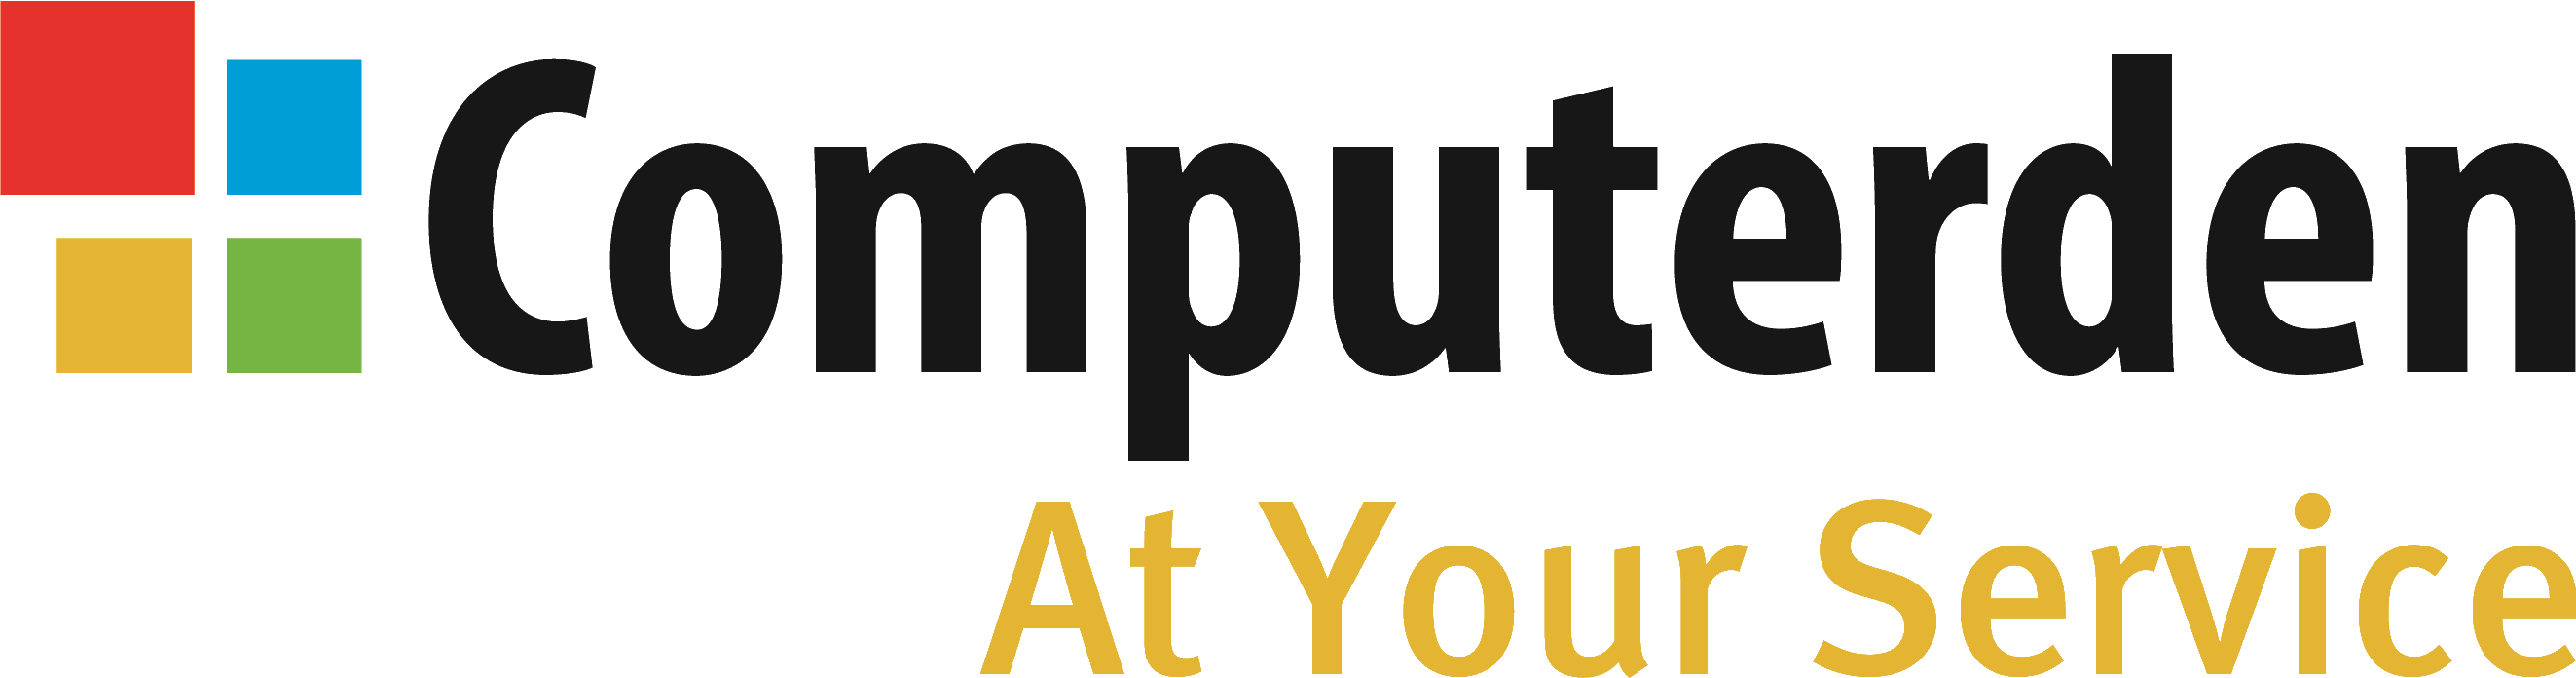 computerden at yout service